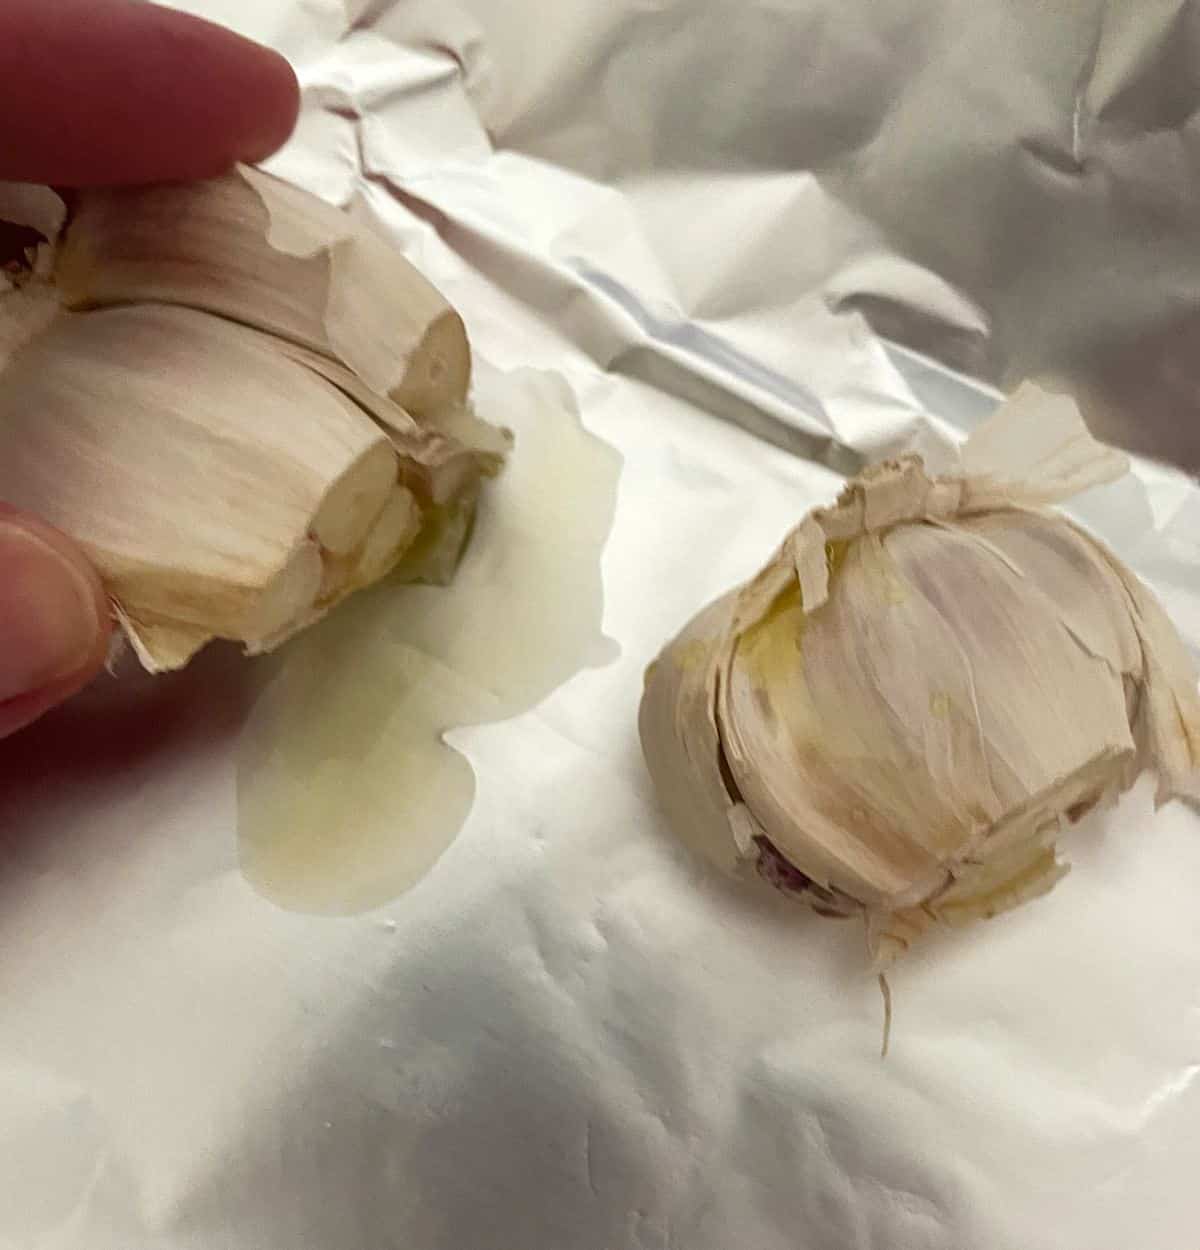 garlic cloves on aluminum foil, with olive oil, prior to roasting.